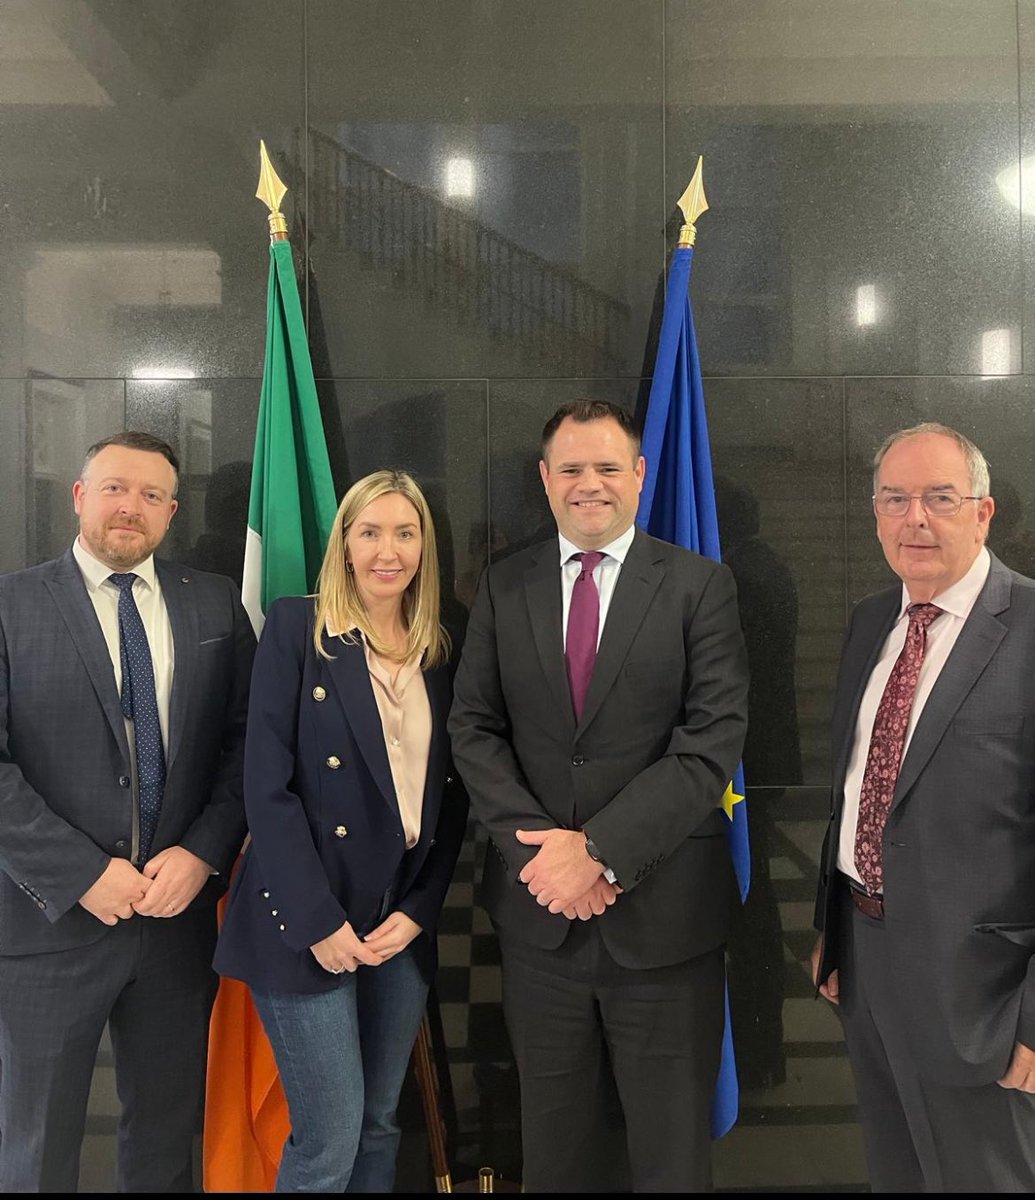 Constructive meeting today with the new Minister with responsibility for insurance @nealerichmond Despite the Govt’s significant programme of insurance reform the savings are still not being passed on to businesses, sports, arts and charitable organisations. #InsuranceReform